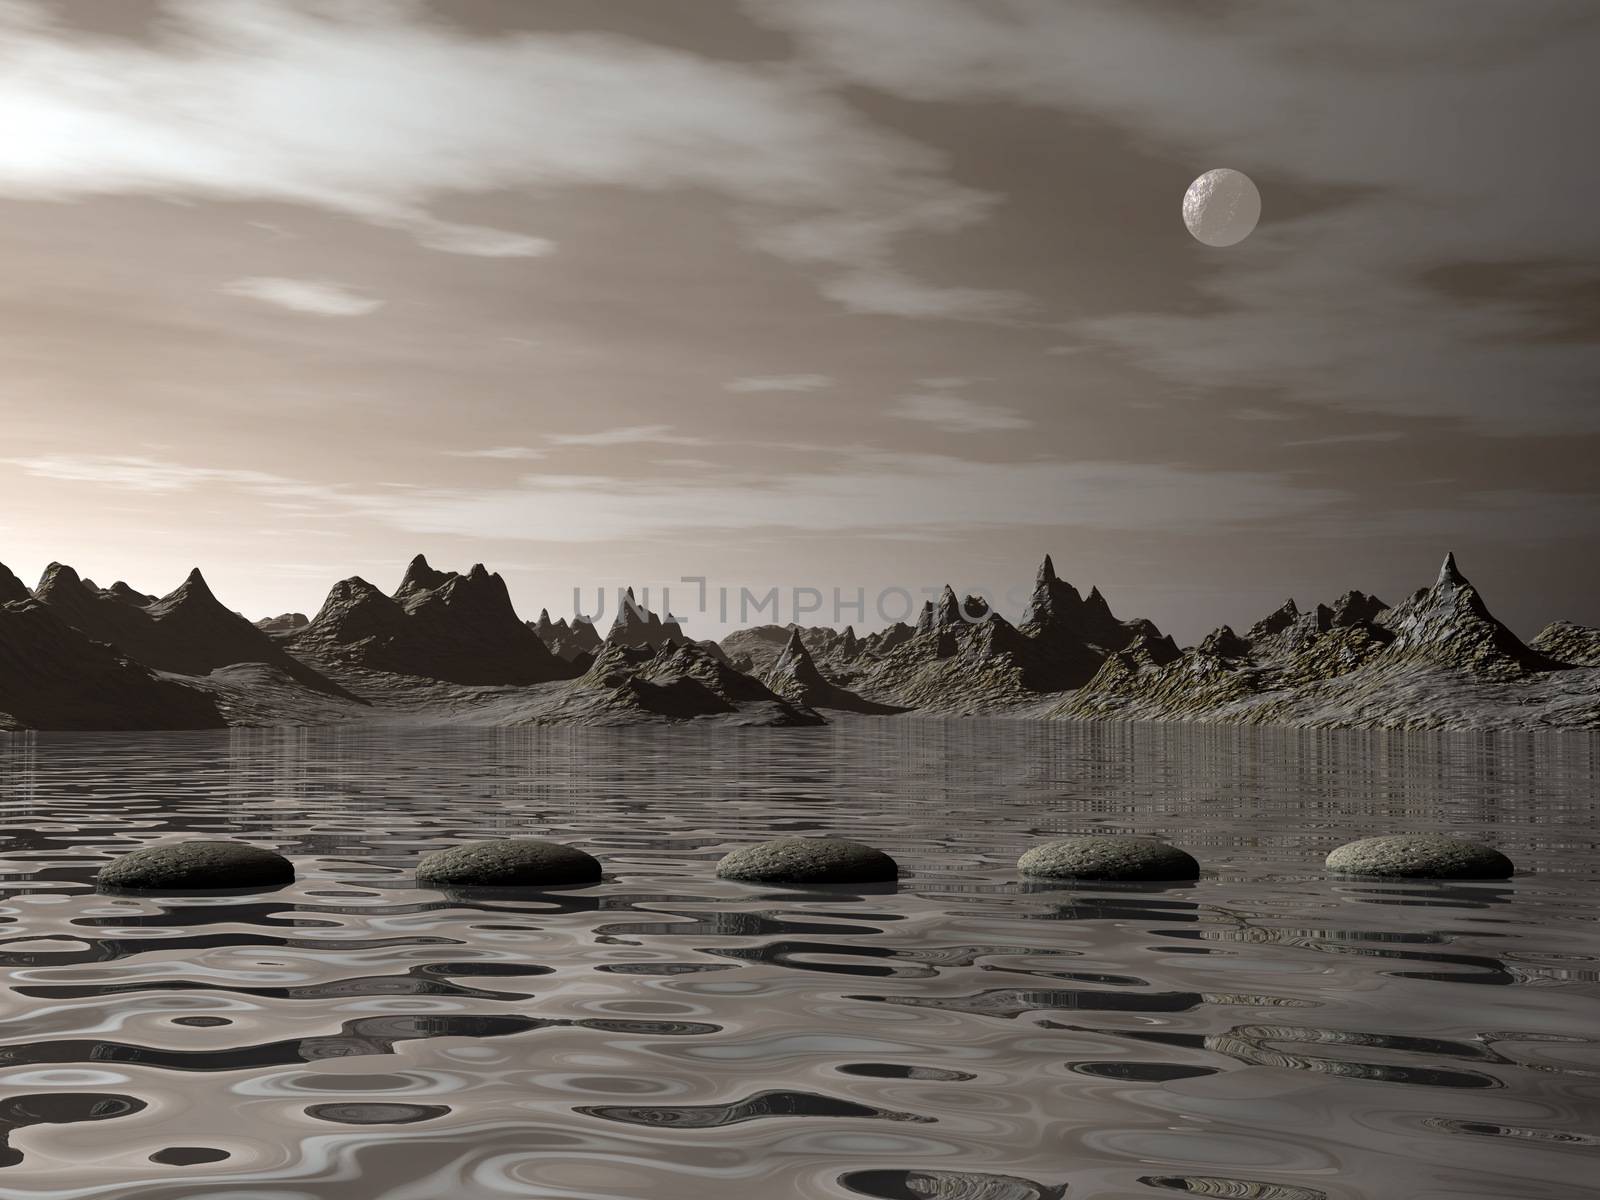 Steps upon water near mountains by night with full moon - 3D render